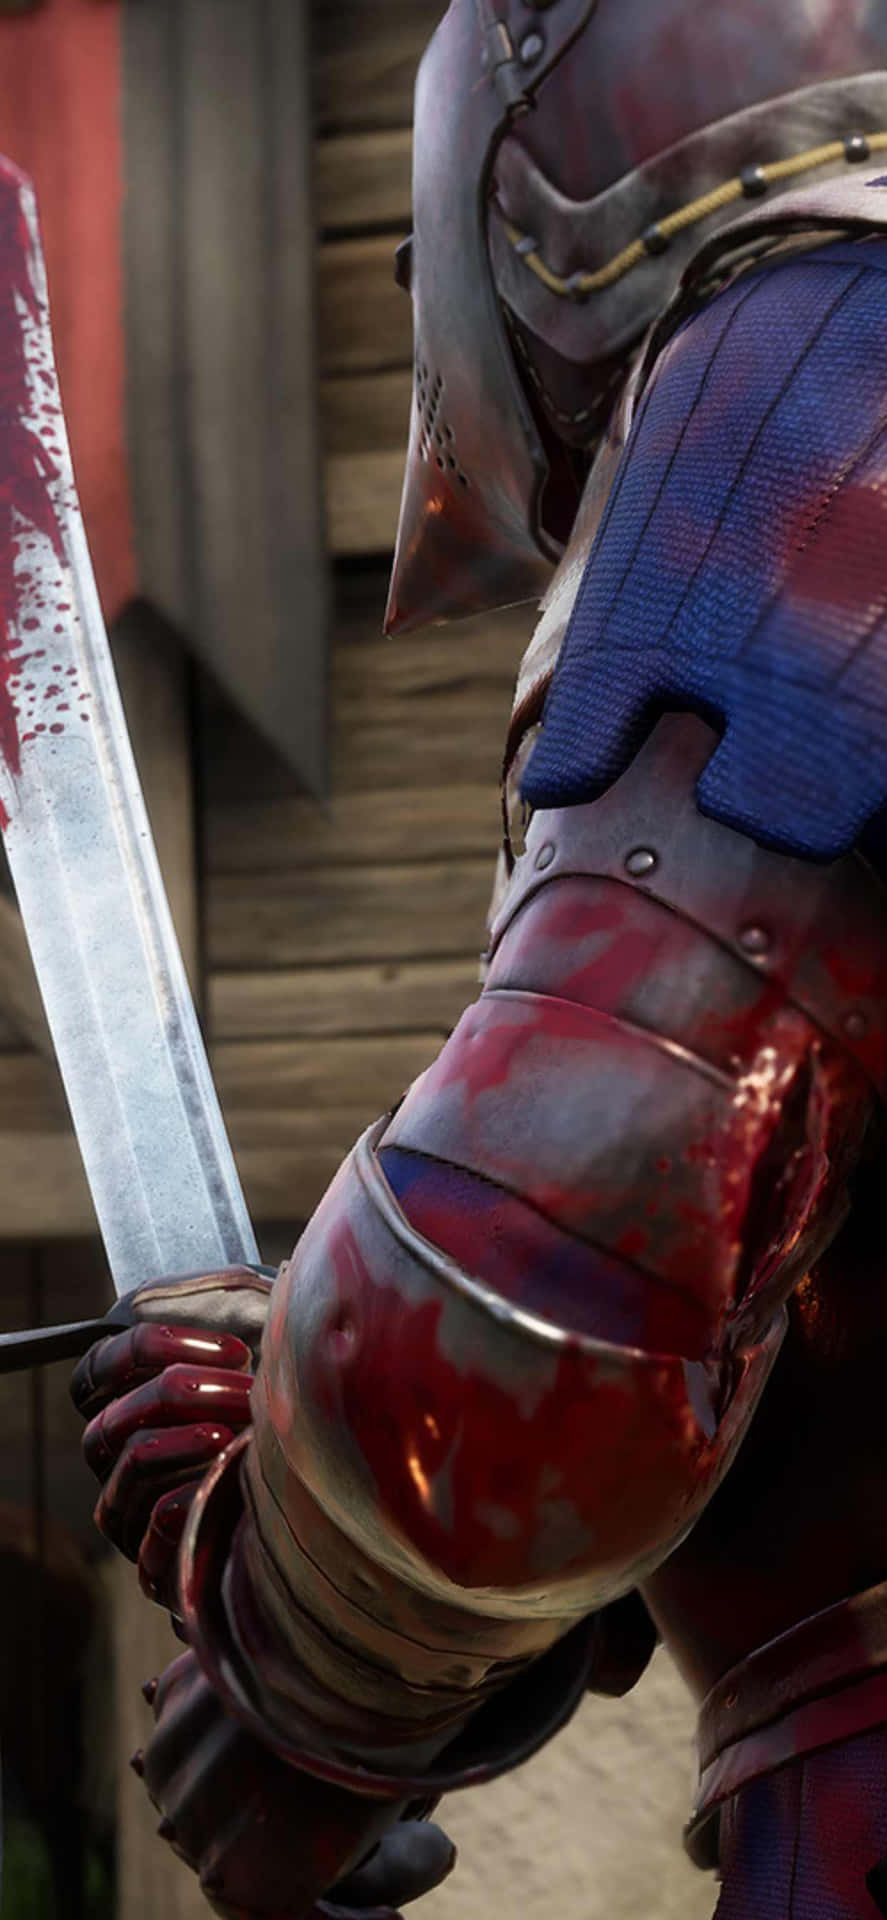 Experience the Ultimate Game on iPhone Xs Max with Mordhau